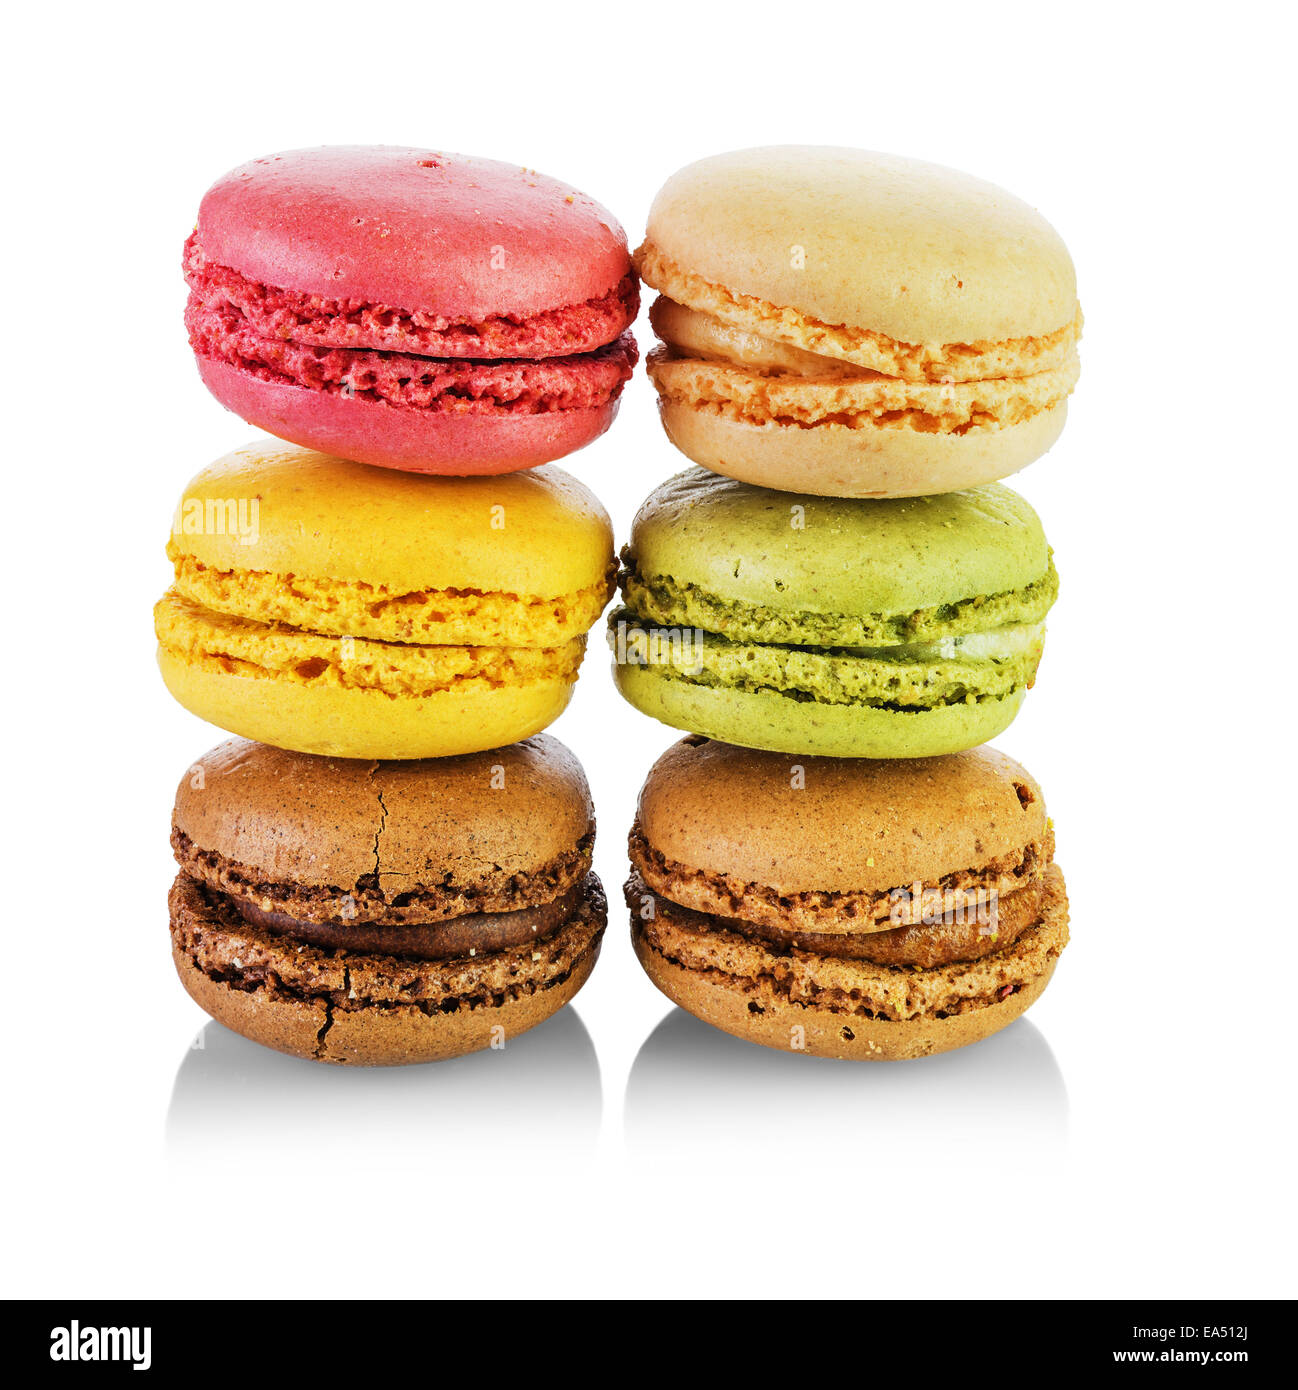 Colorful and tasty French Macarons on white background Stock Photo